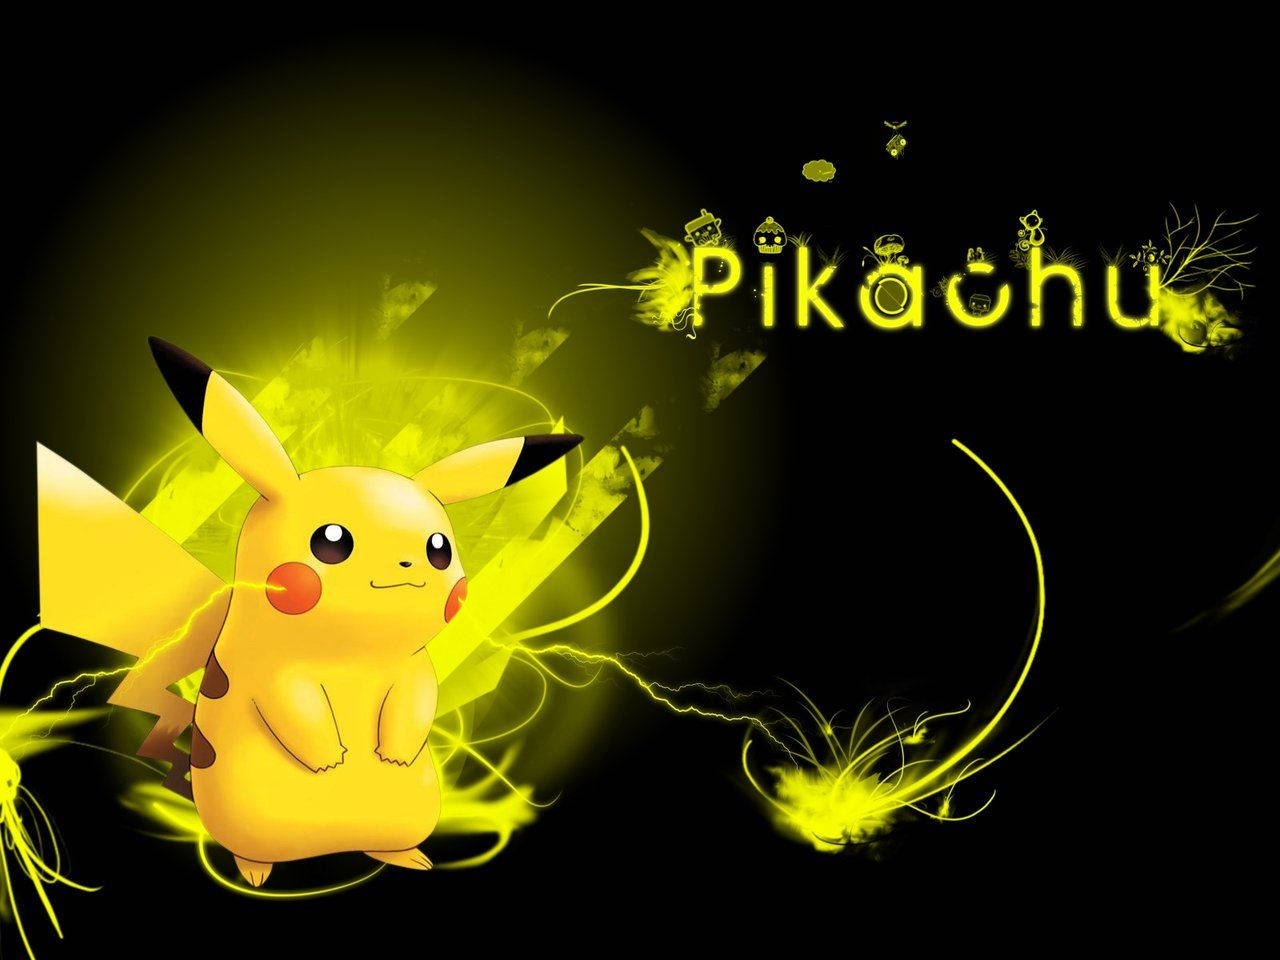 Pikachu 3d With Yellow Electricity Wallpaper